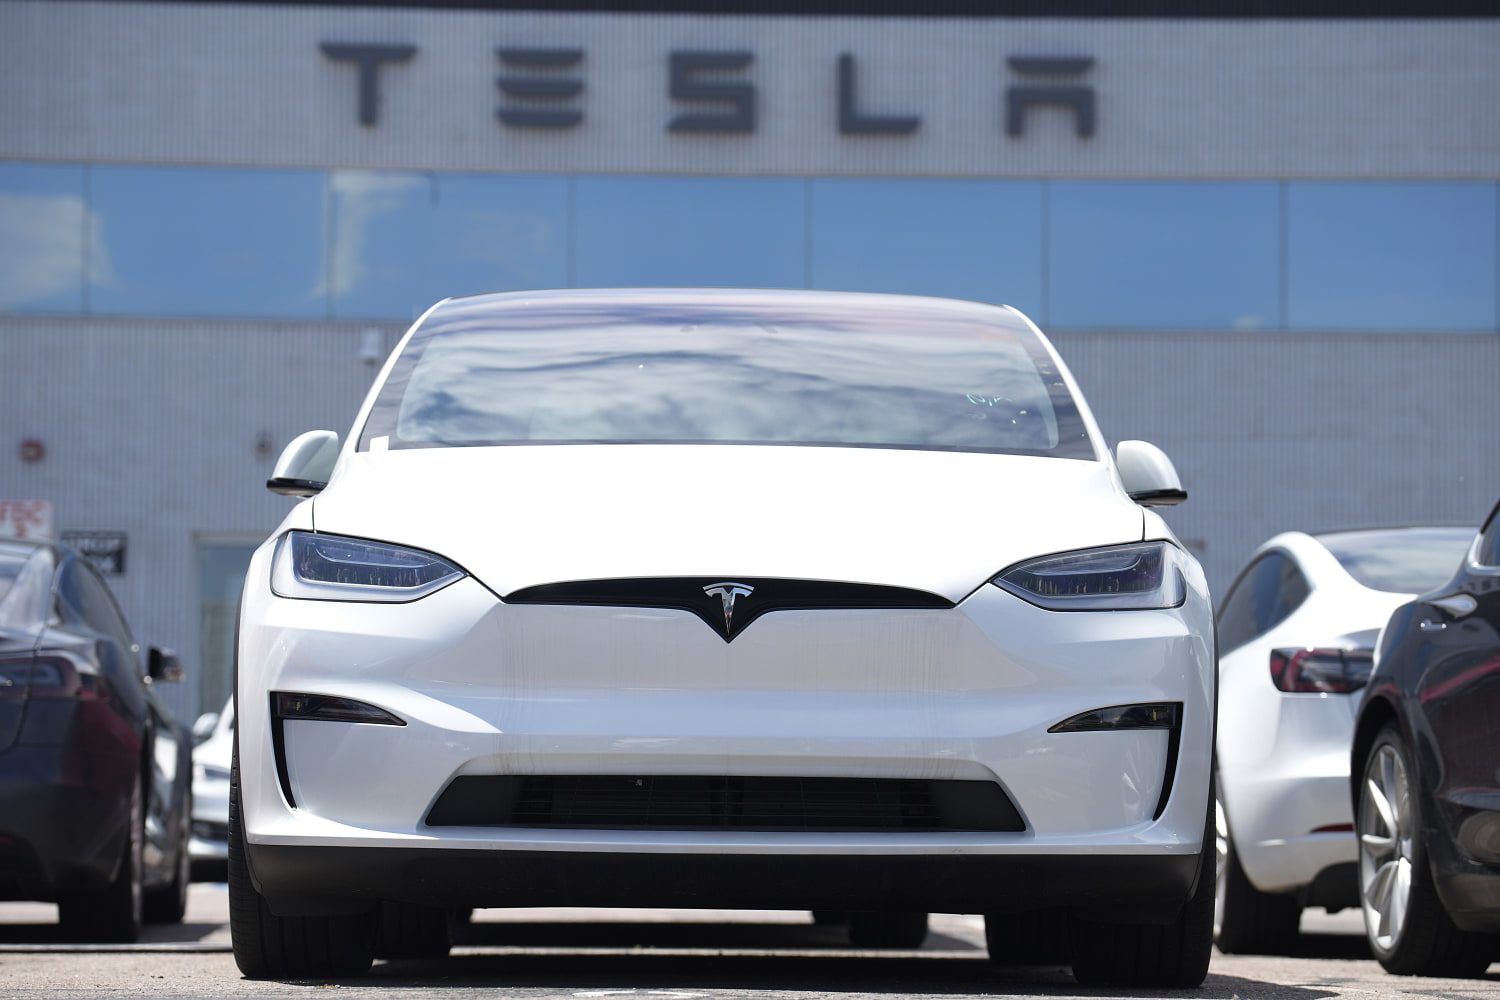 Tesla cuts U.S. prices on its Model Y, S and X vehicles after a difficult week